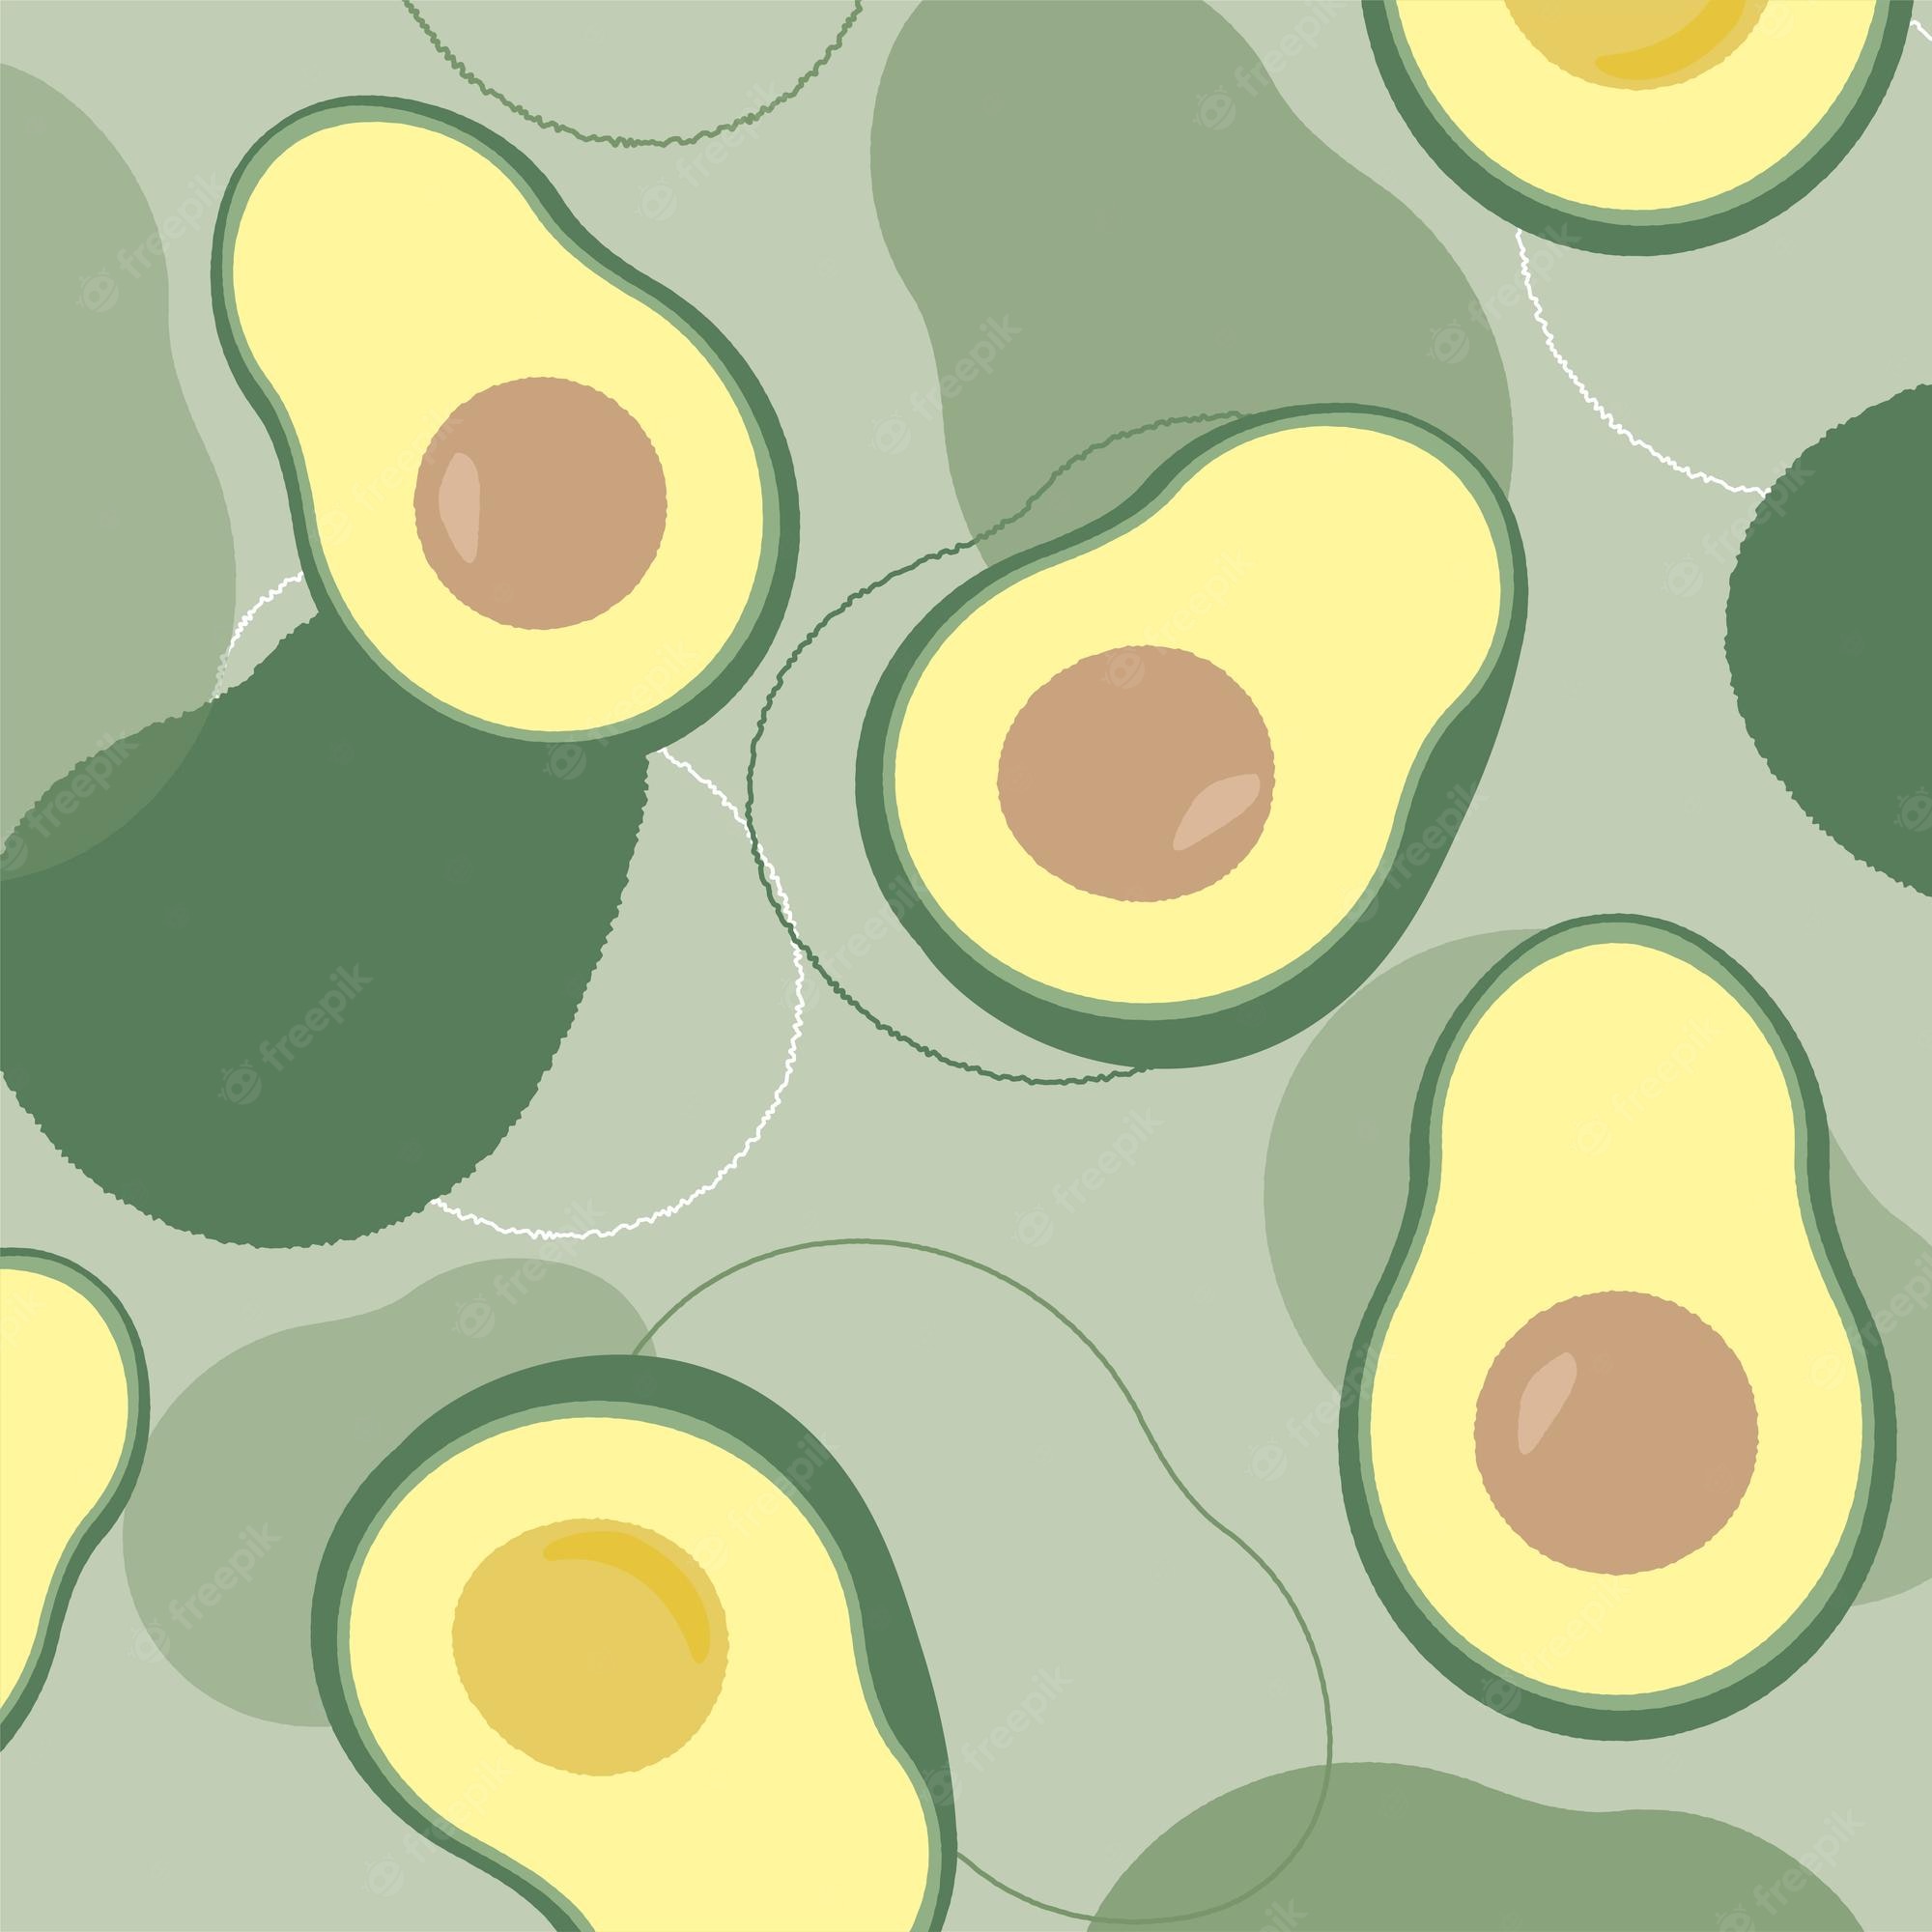 A pattern of avocados on a green background - Avocado